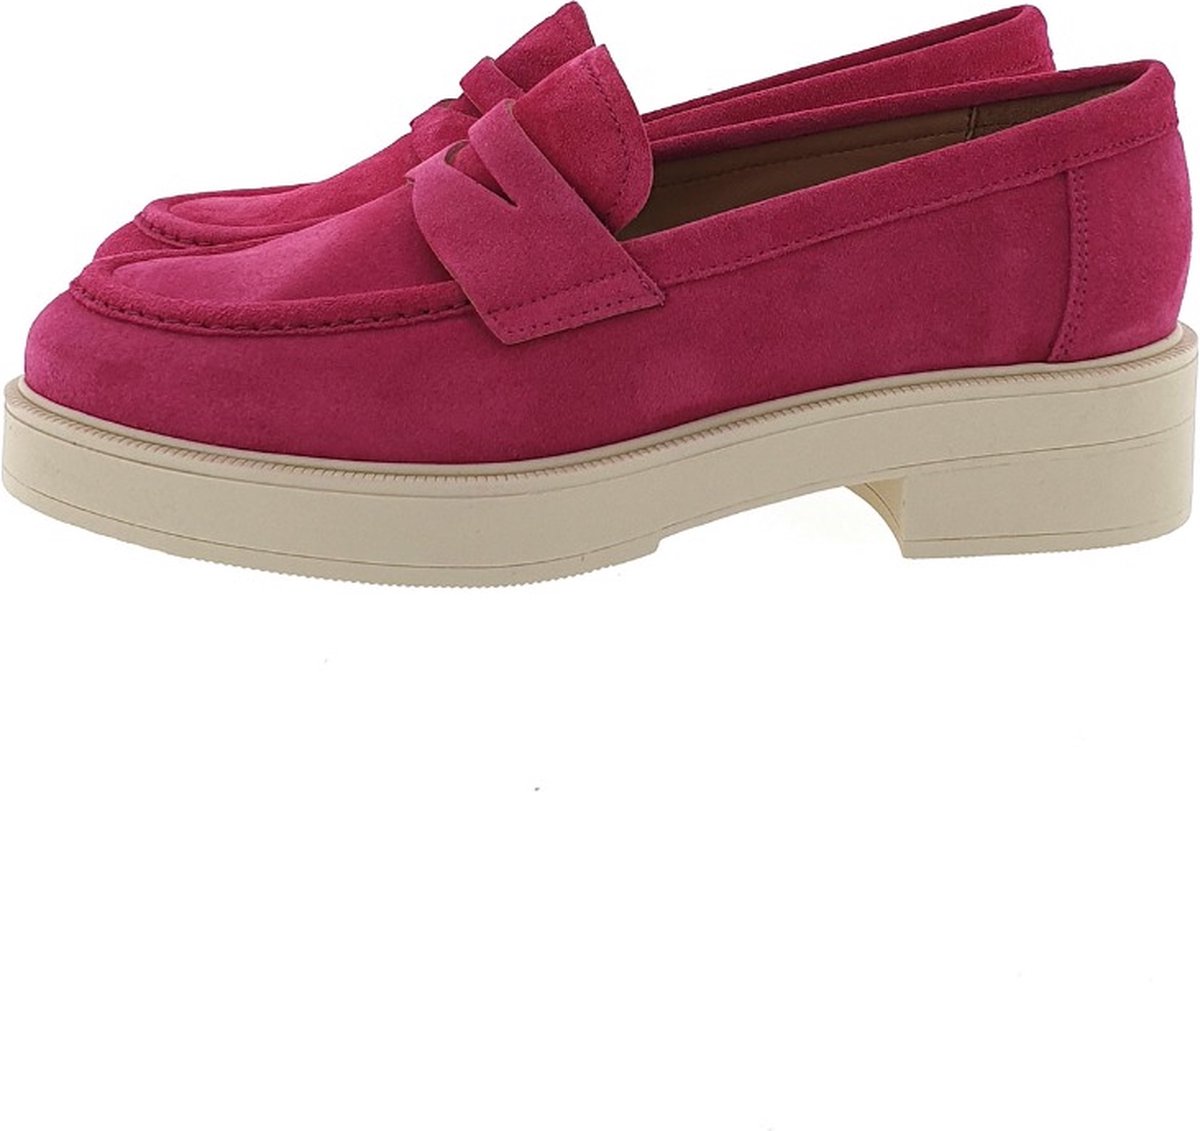 CTWLK London loafer fuxia, 38 / 5